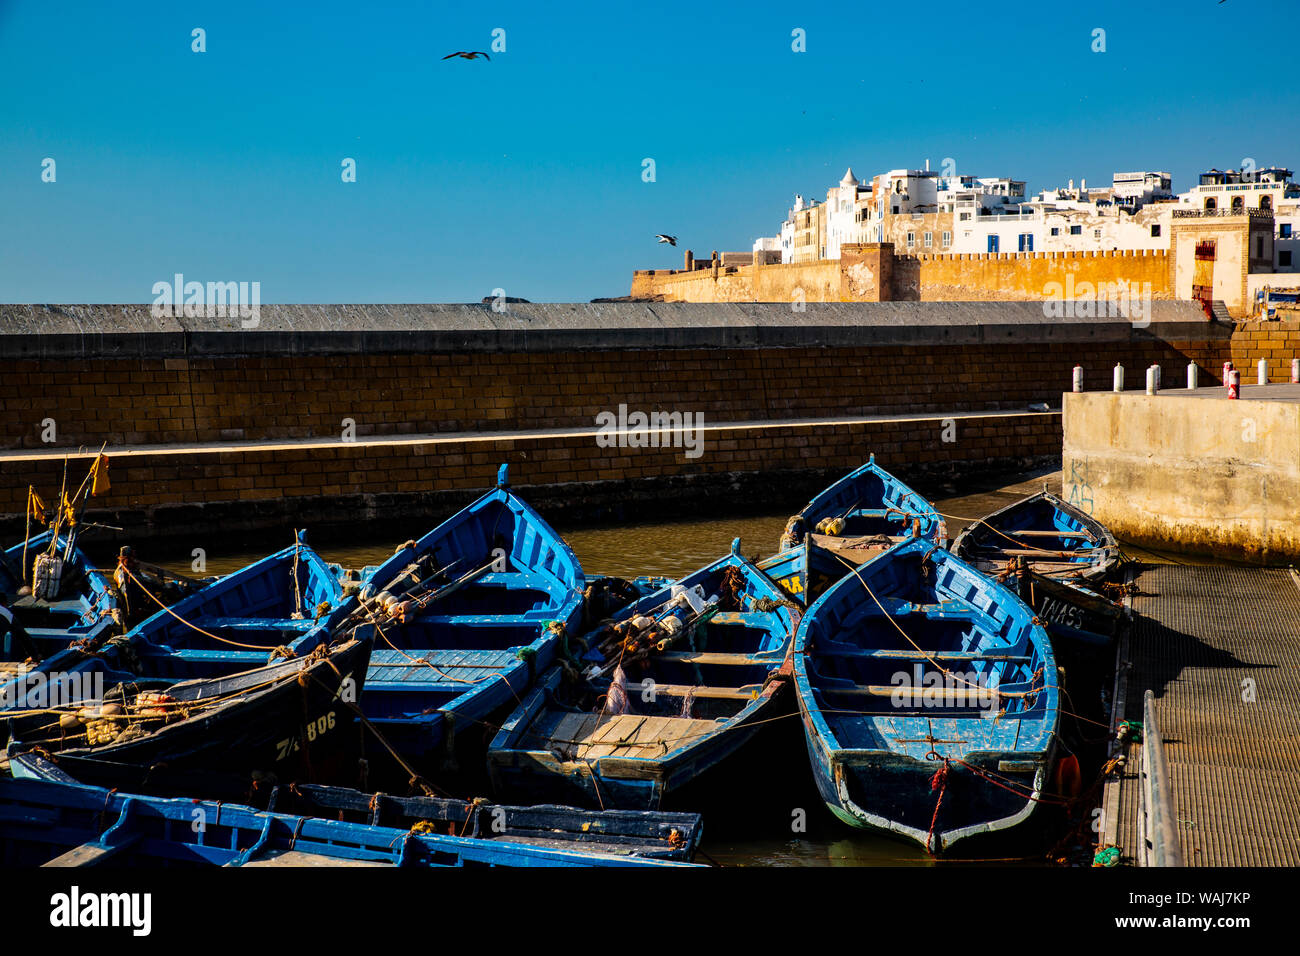 Essaouira, Morocco. Seagulls flying, wooden boats, walled city Stock Photo